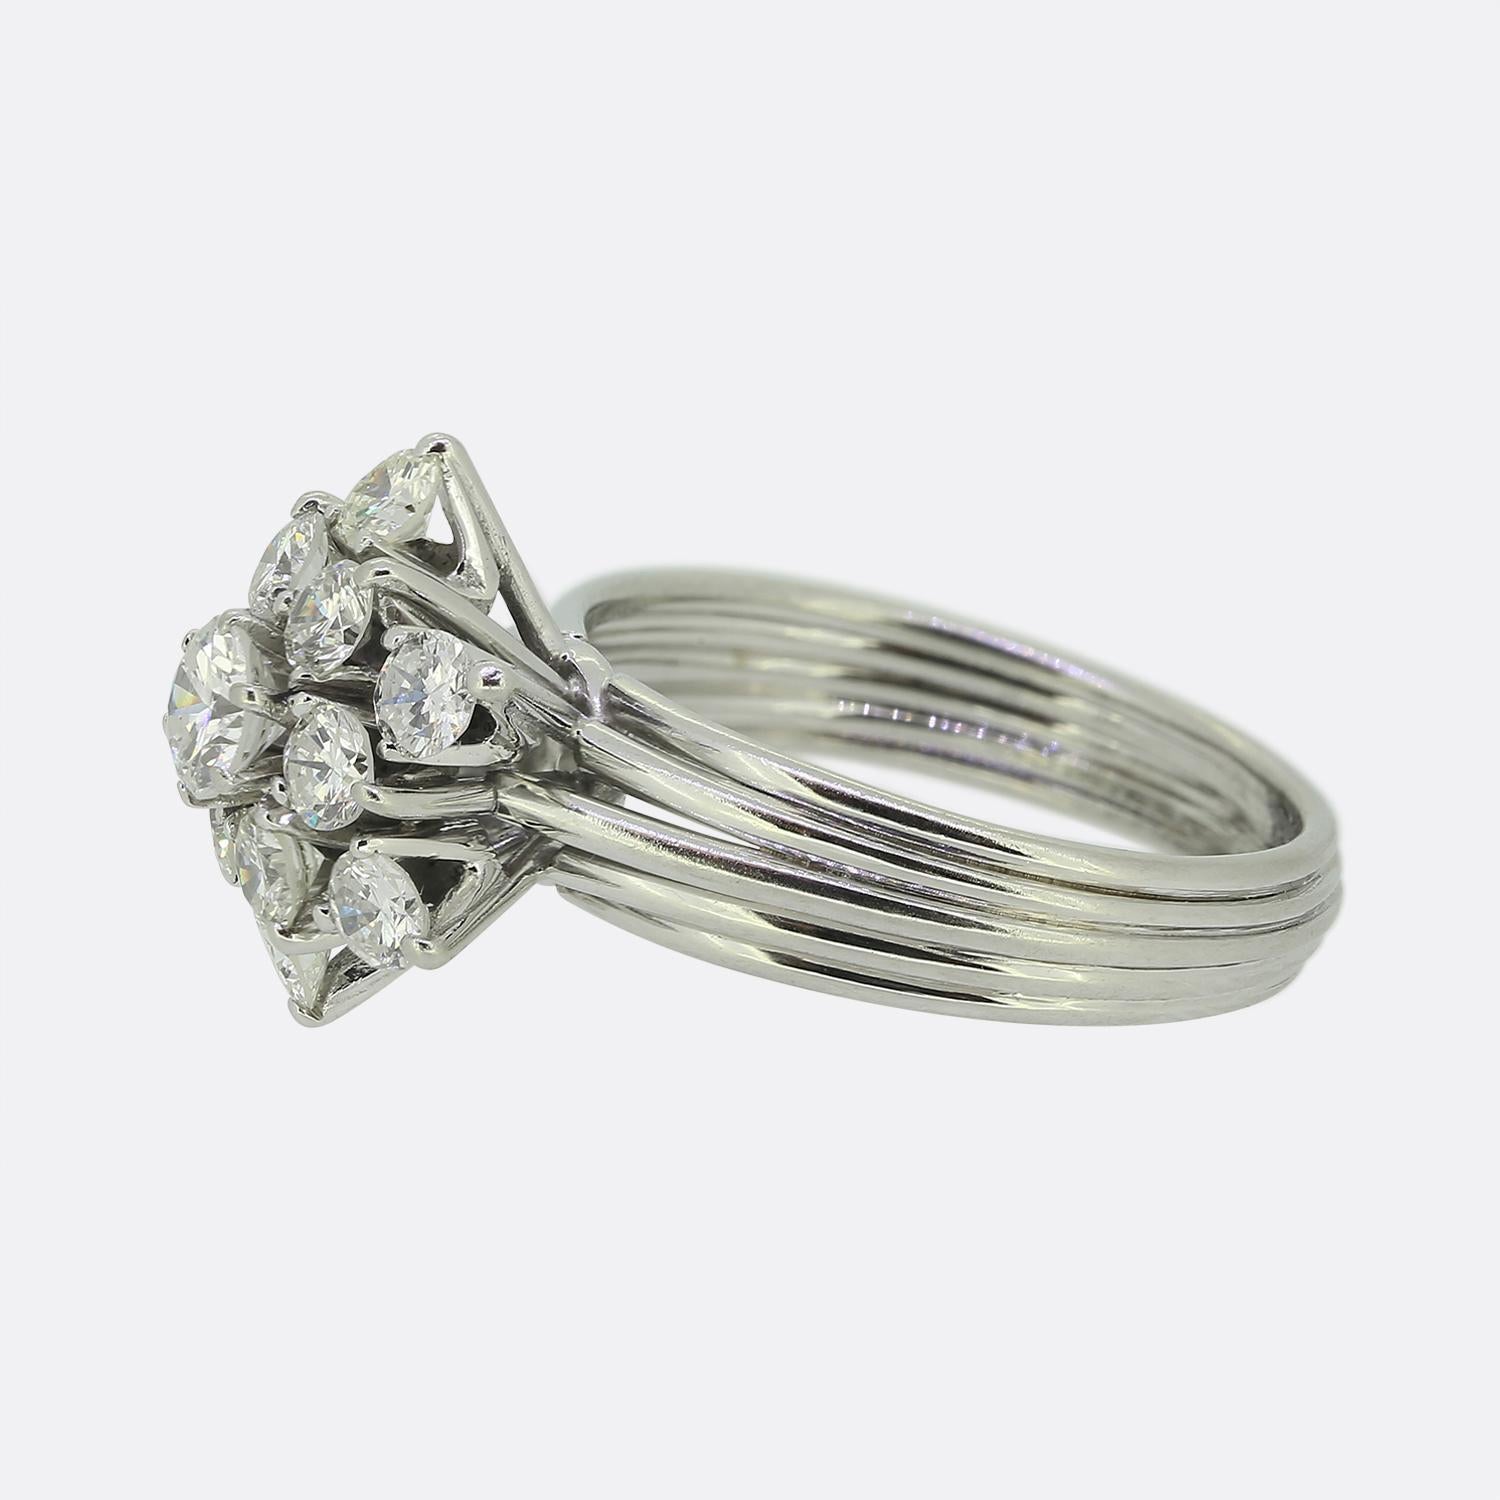 Here we have a stunning diamond cluster ring. A multilayered shank consisting of five slim stacked bands plays host to a single round brilliant cut diamond which sits proud at the centre of the face. This principal diamond is then is surrounded by a